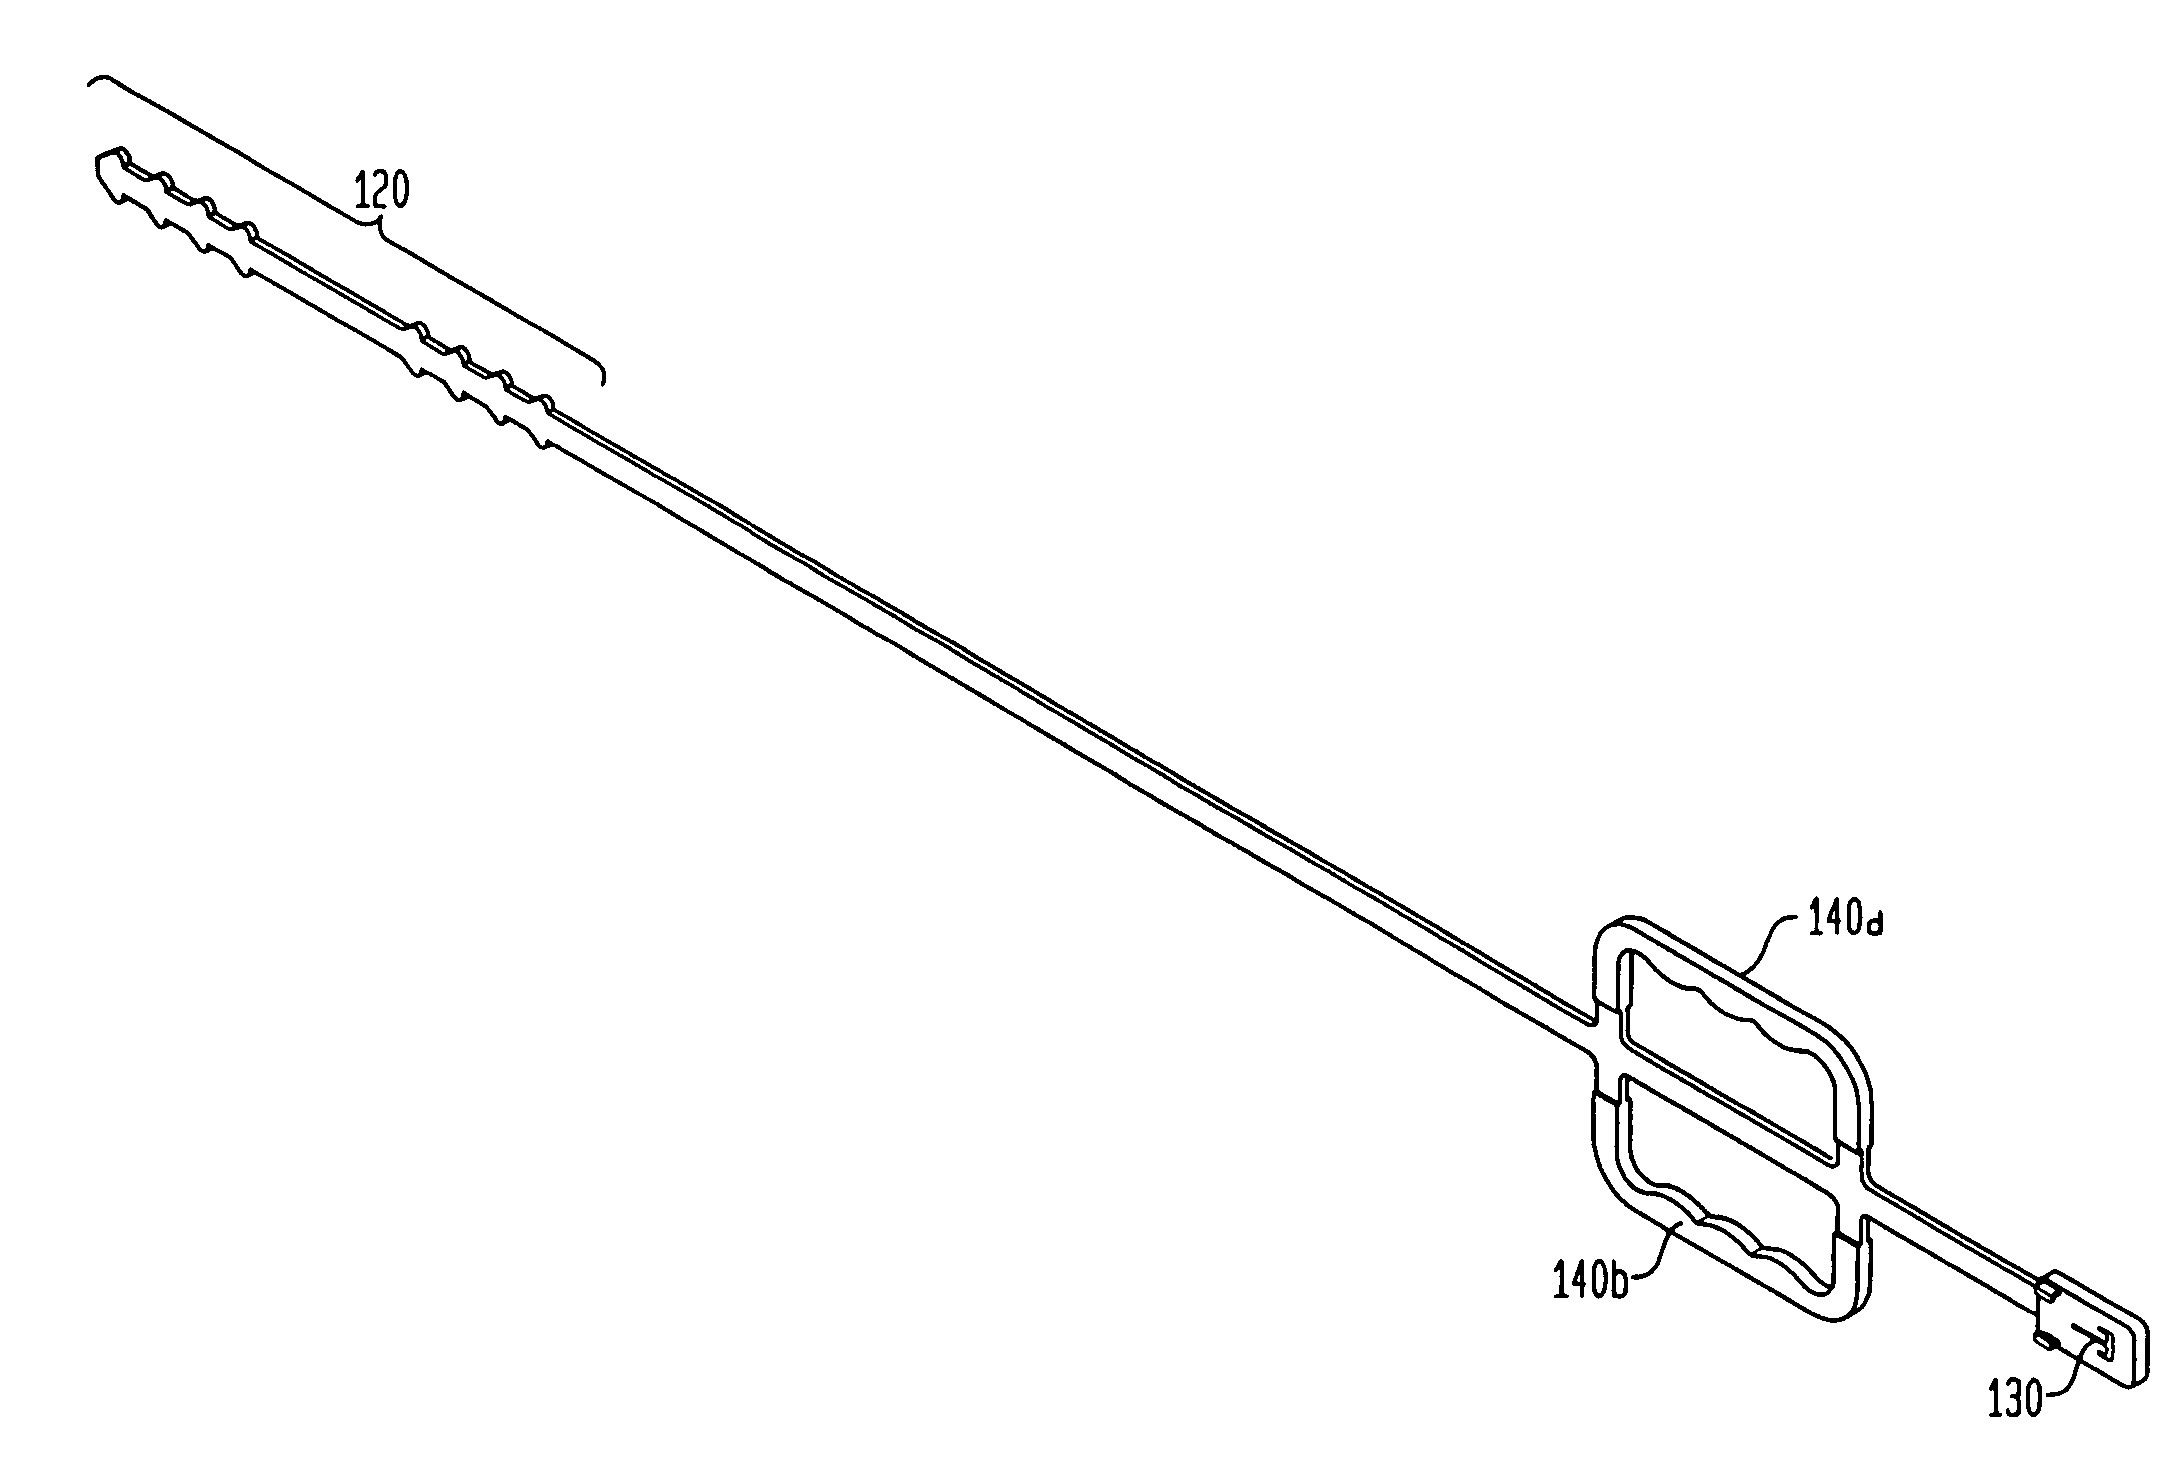 Adjustable plastic carry strap having laterally projecting foldable handles